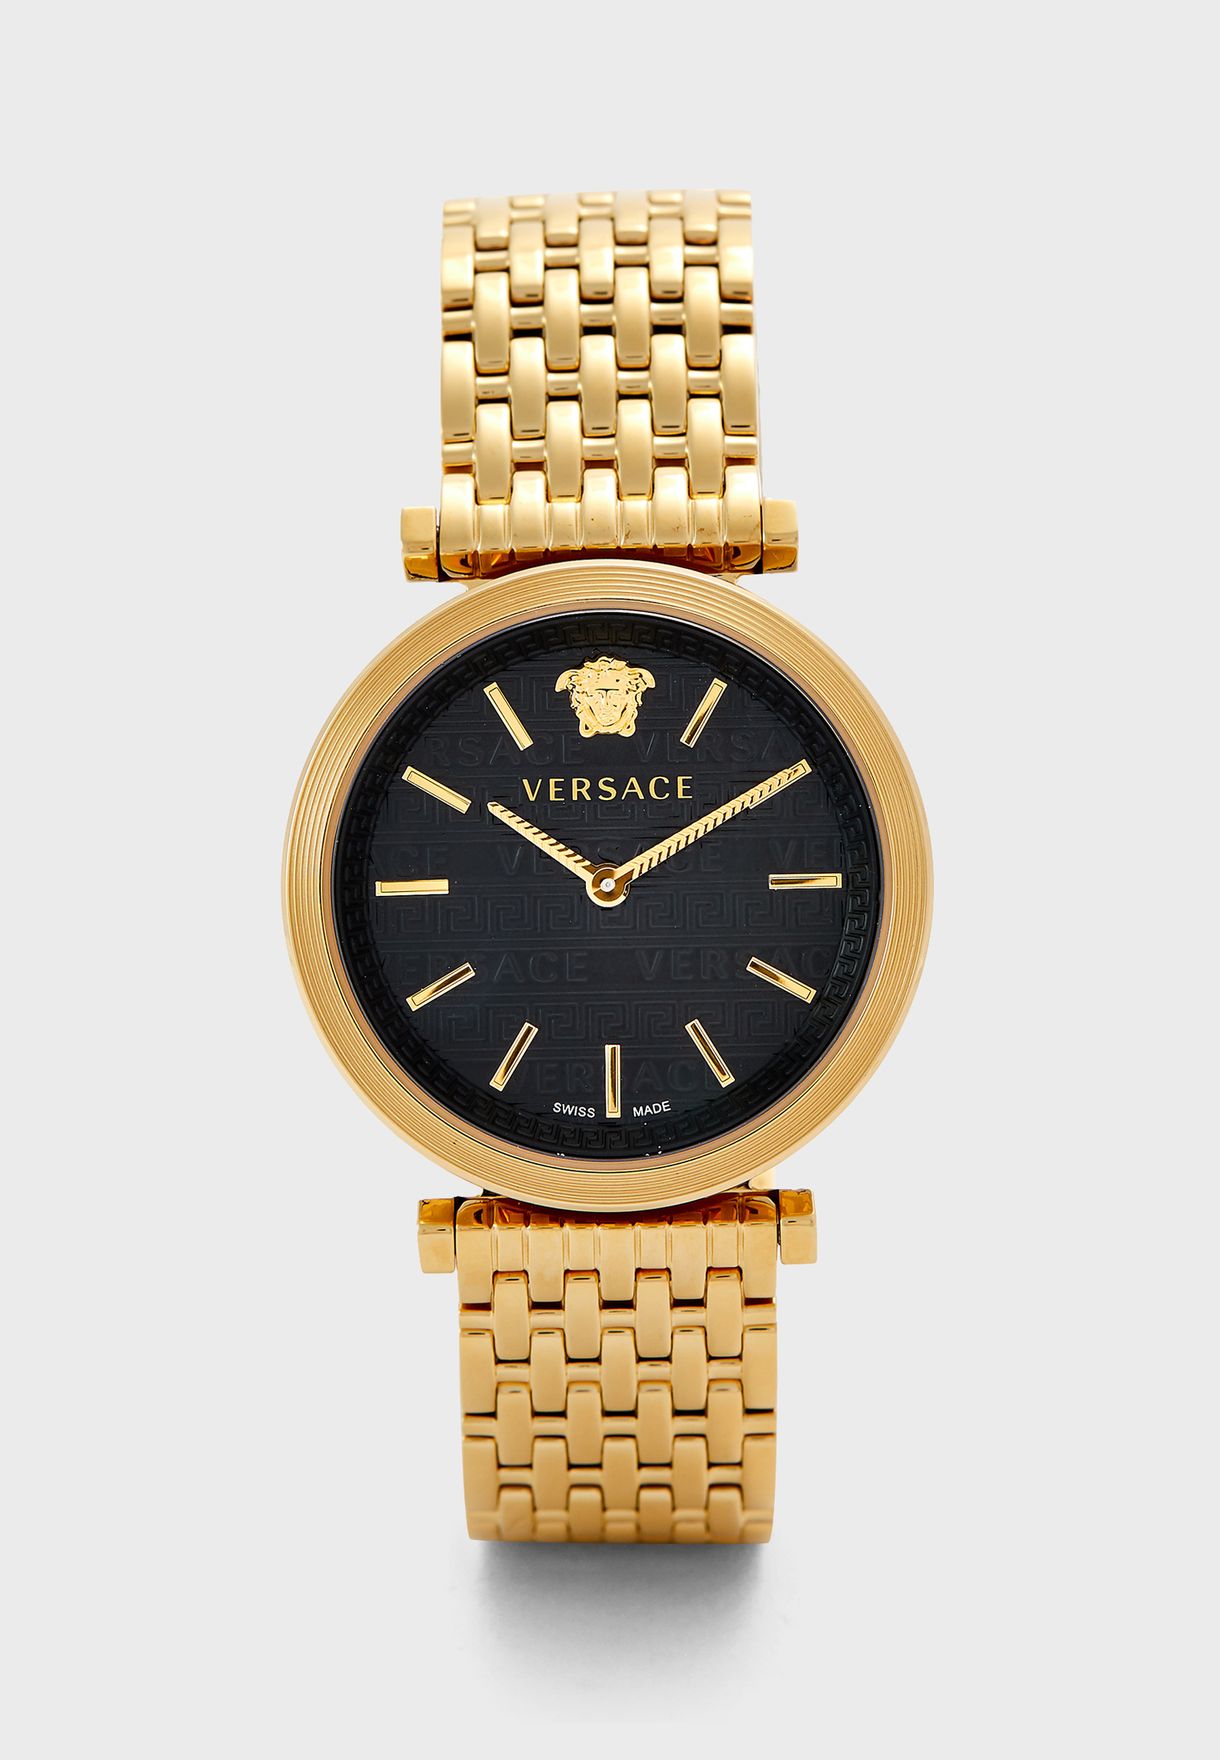 Buy Versace gold Twist Analog Watch for 